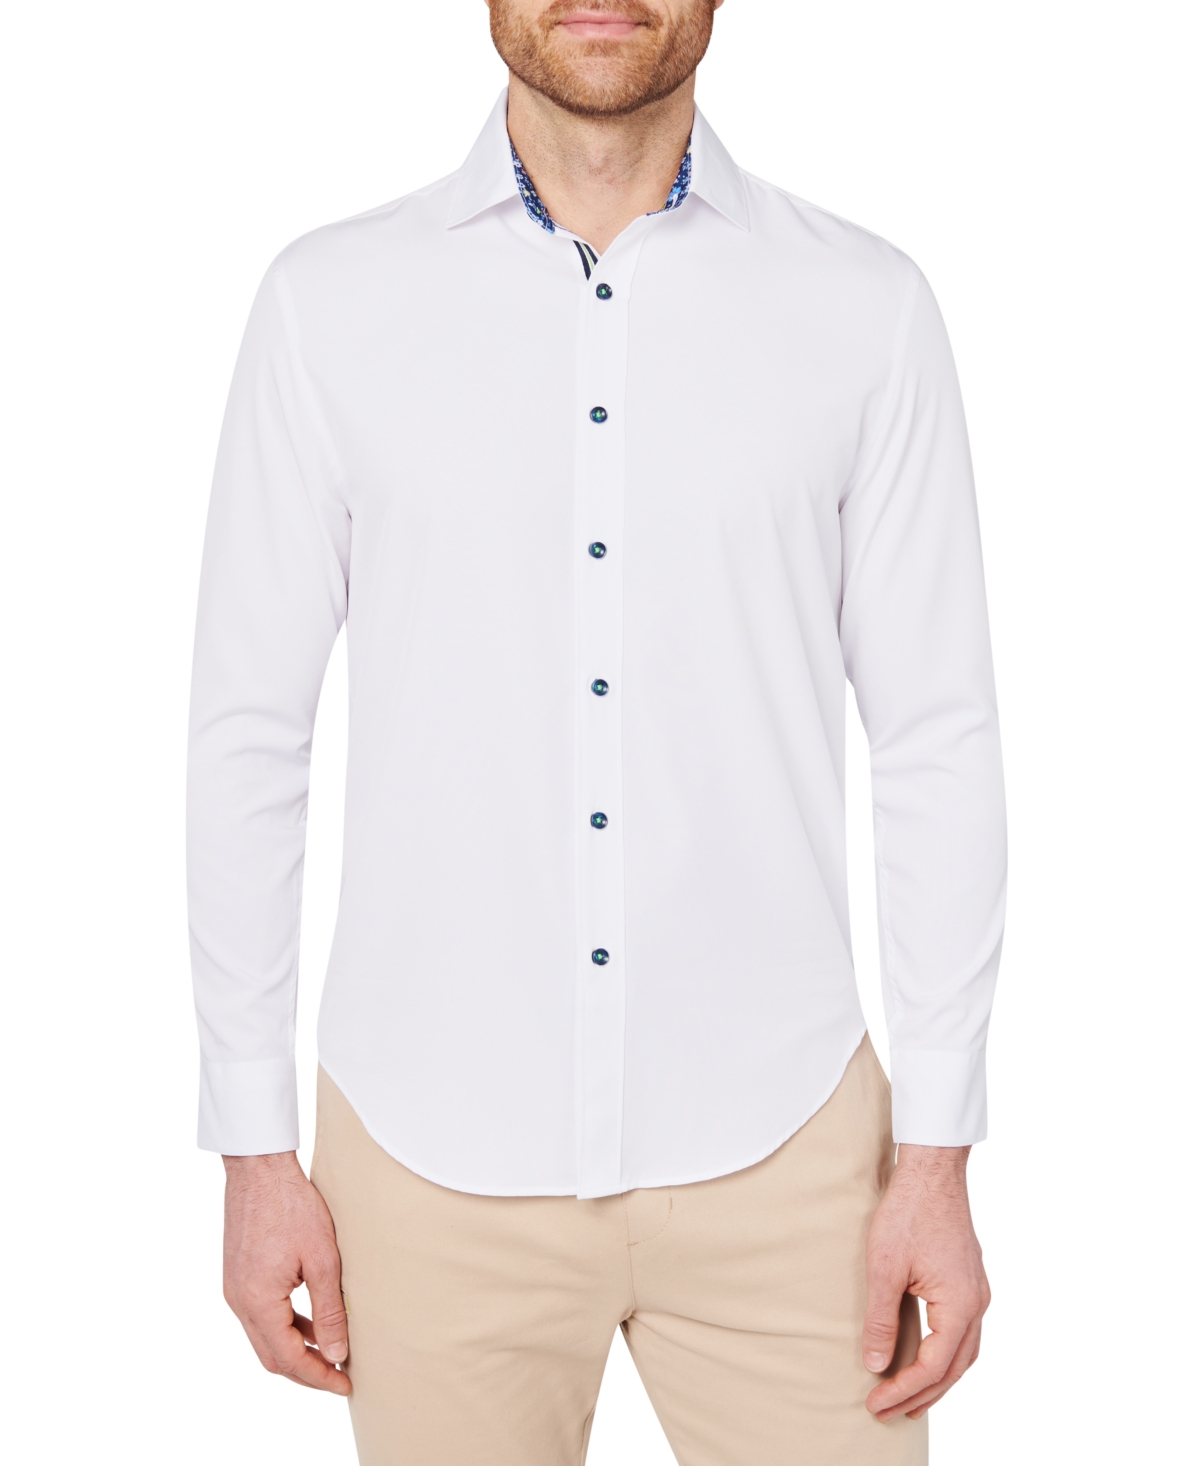 Men's Slim Fit Non-Iron Solid Performance Stretch Button-Down Shirt - White